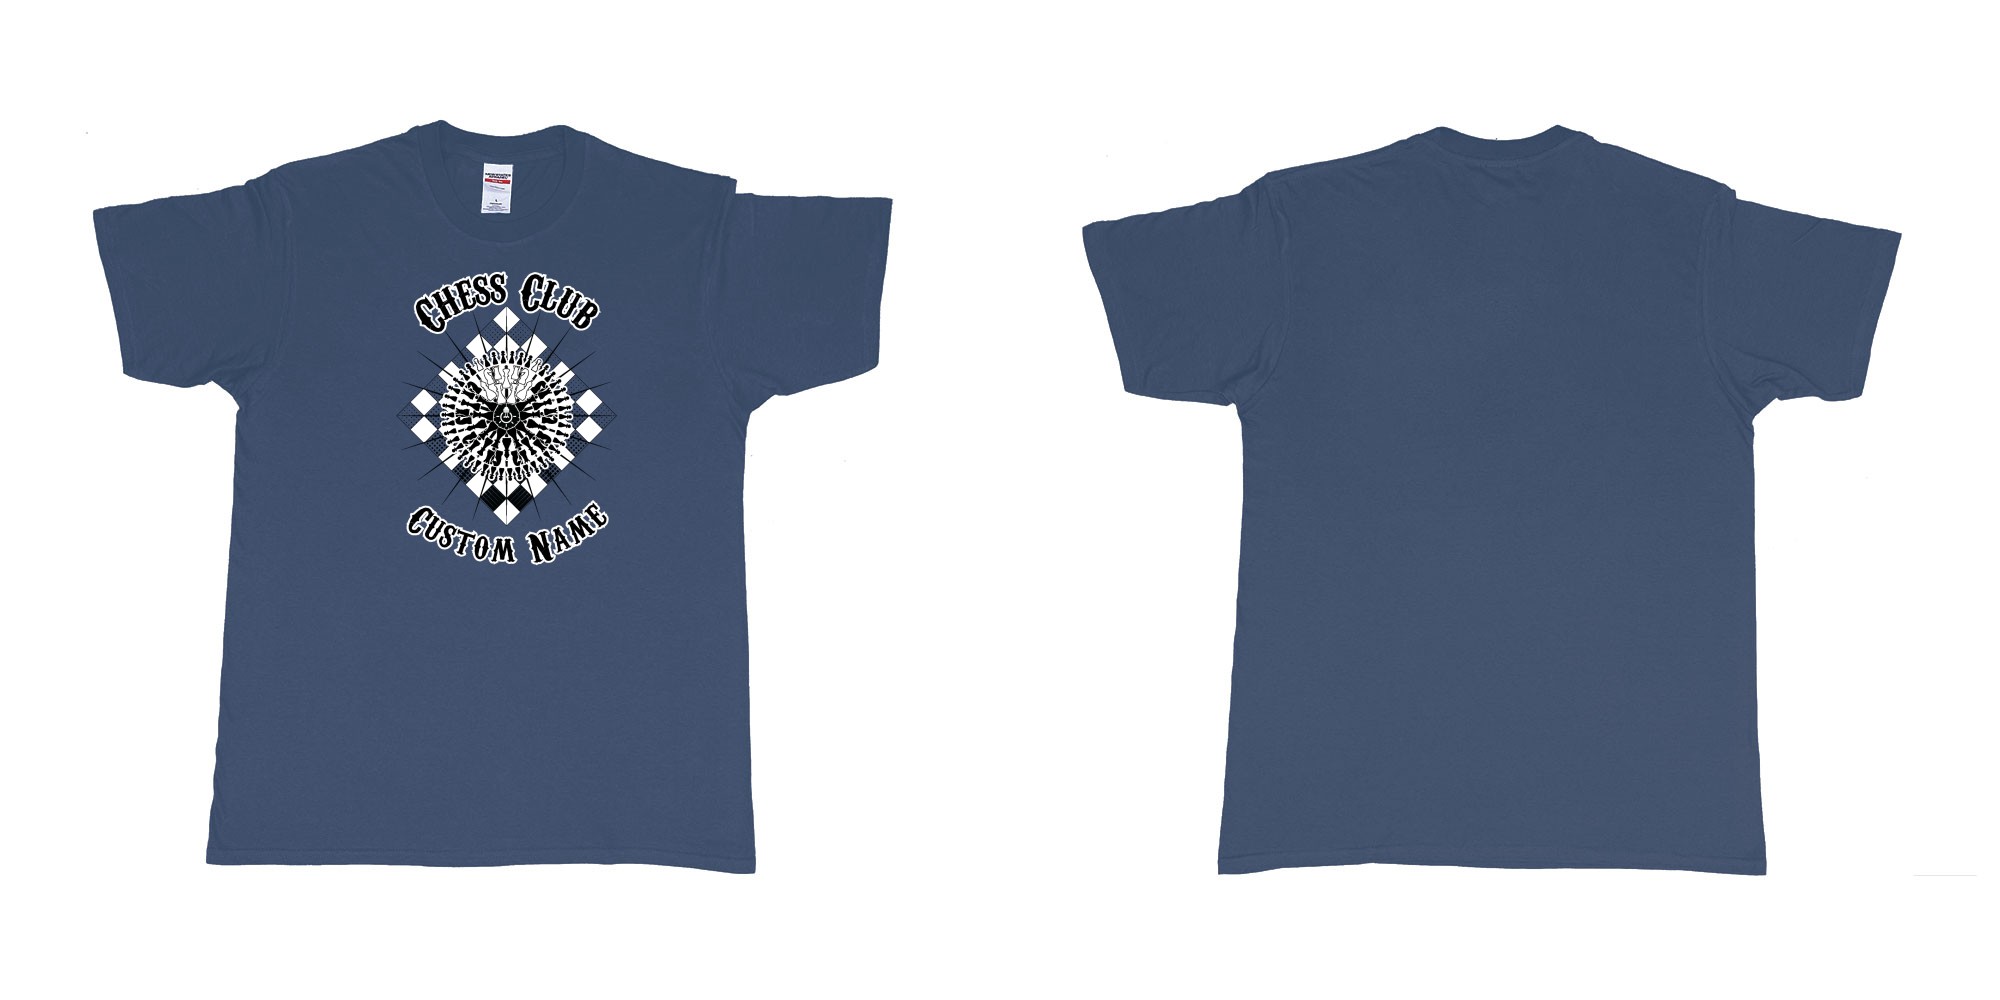 Custom tshirt design chess club mandala in fabric color navy choice your own text made in Bali by The Pirate Way